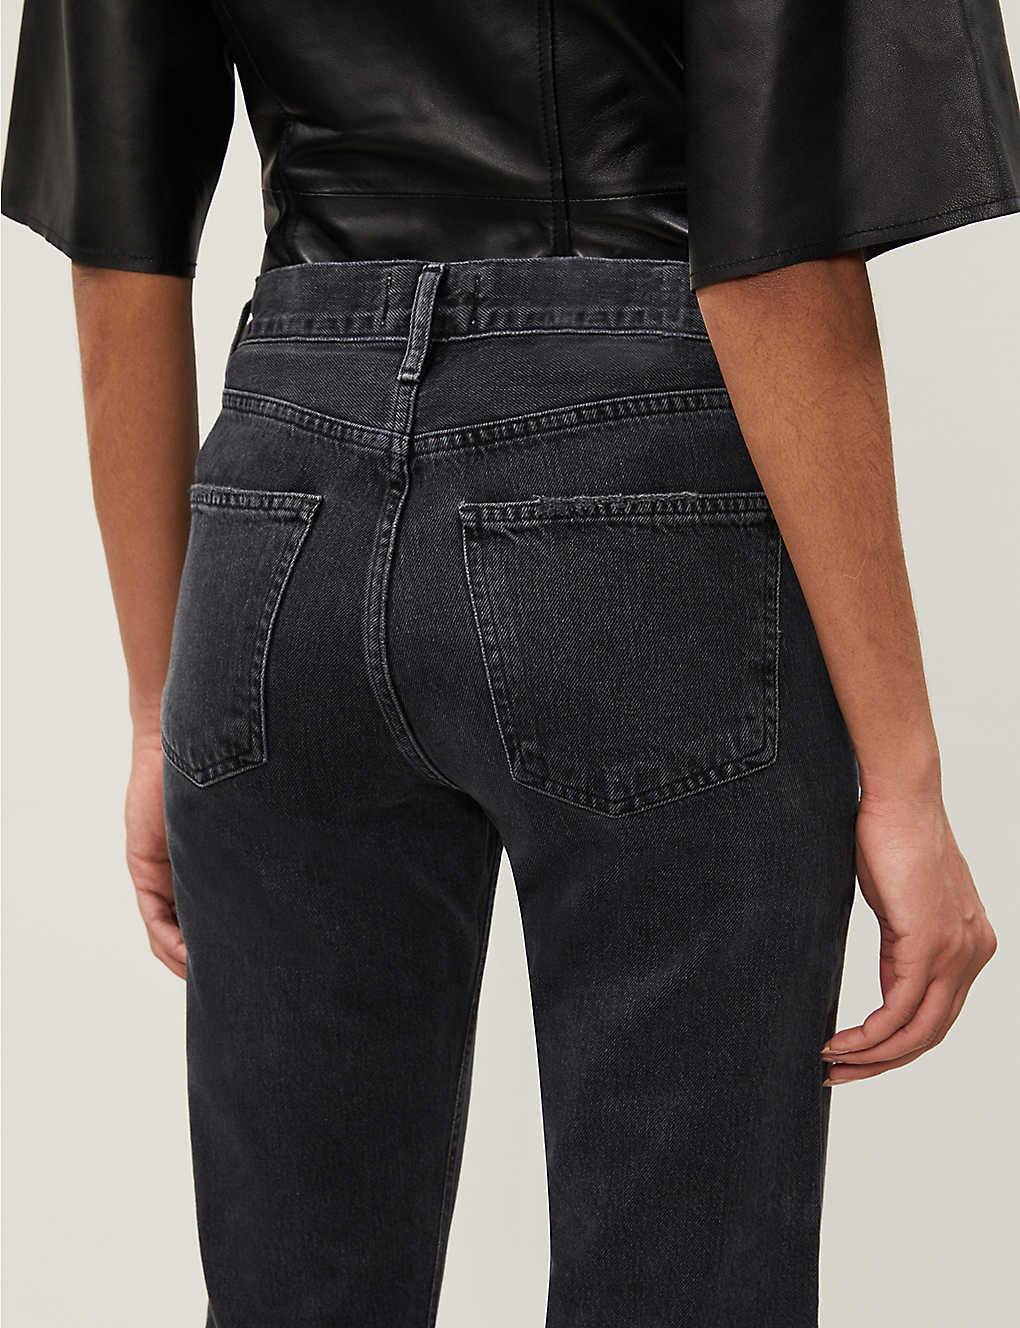 Agolde Denim Riley Straight Cropped Mid-rise Jeans in Black - Lyst